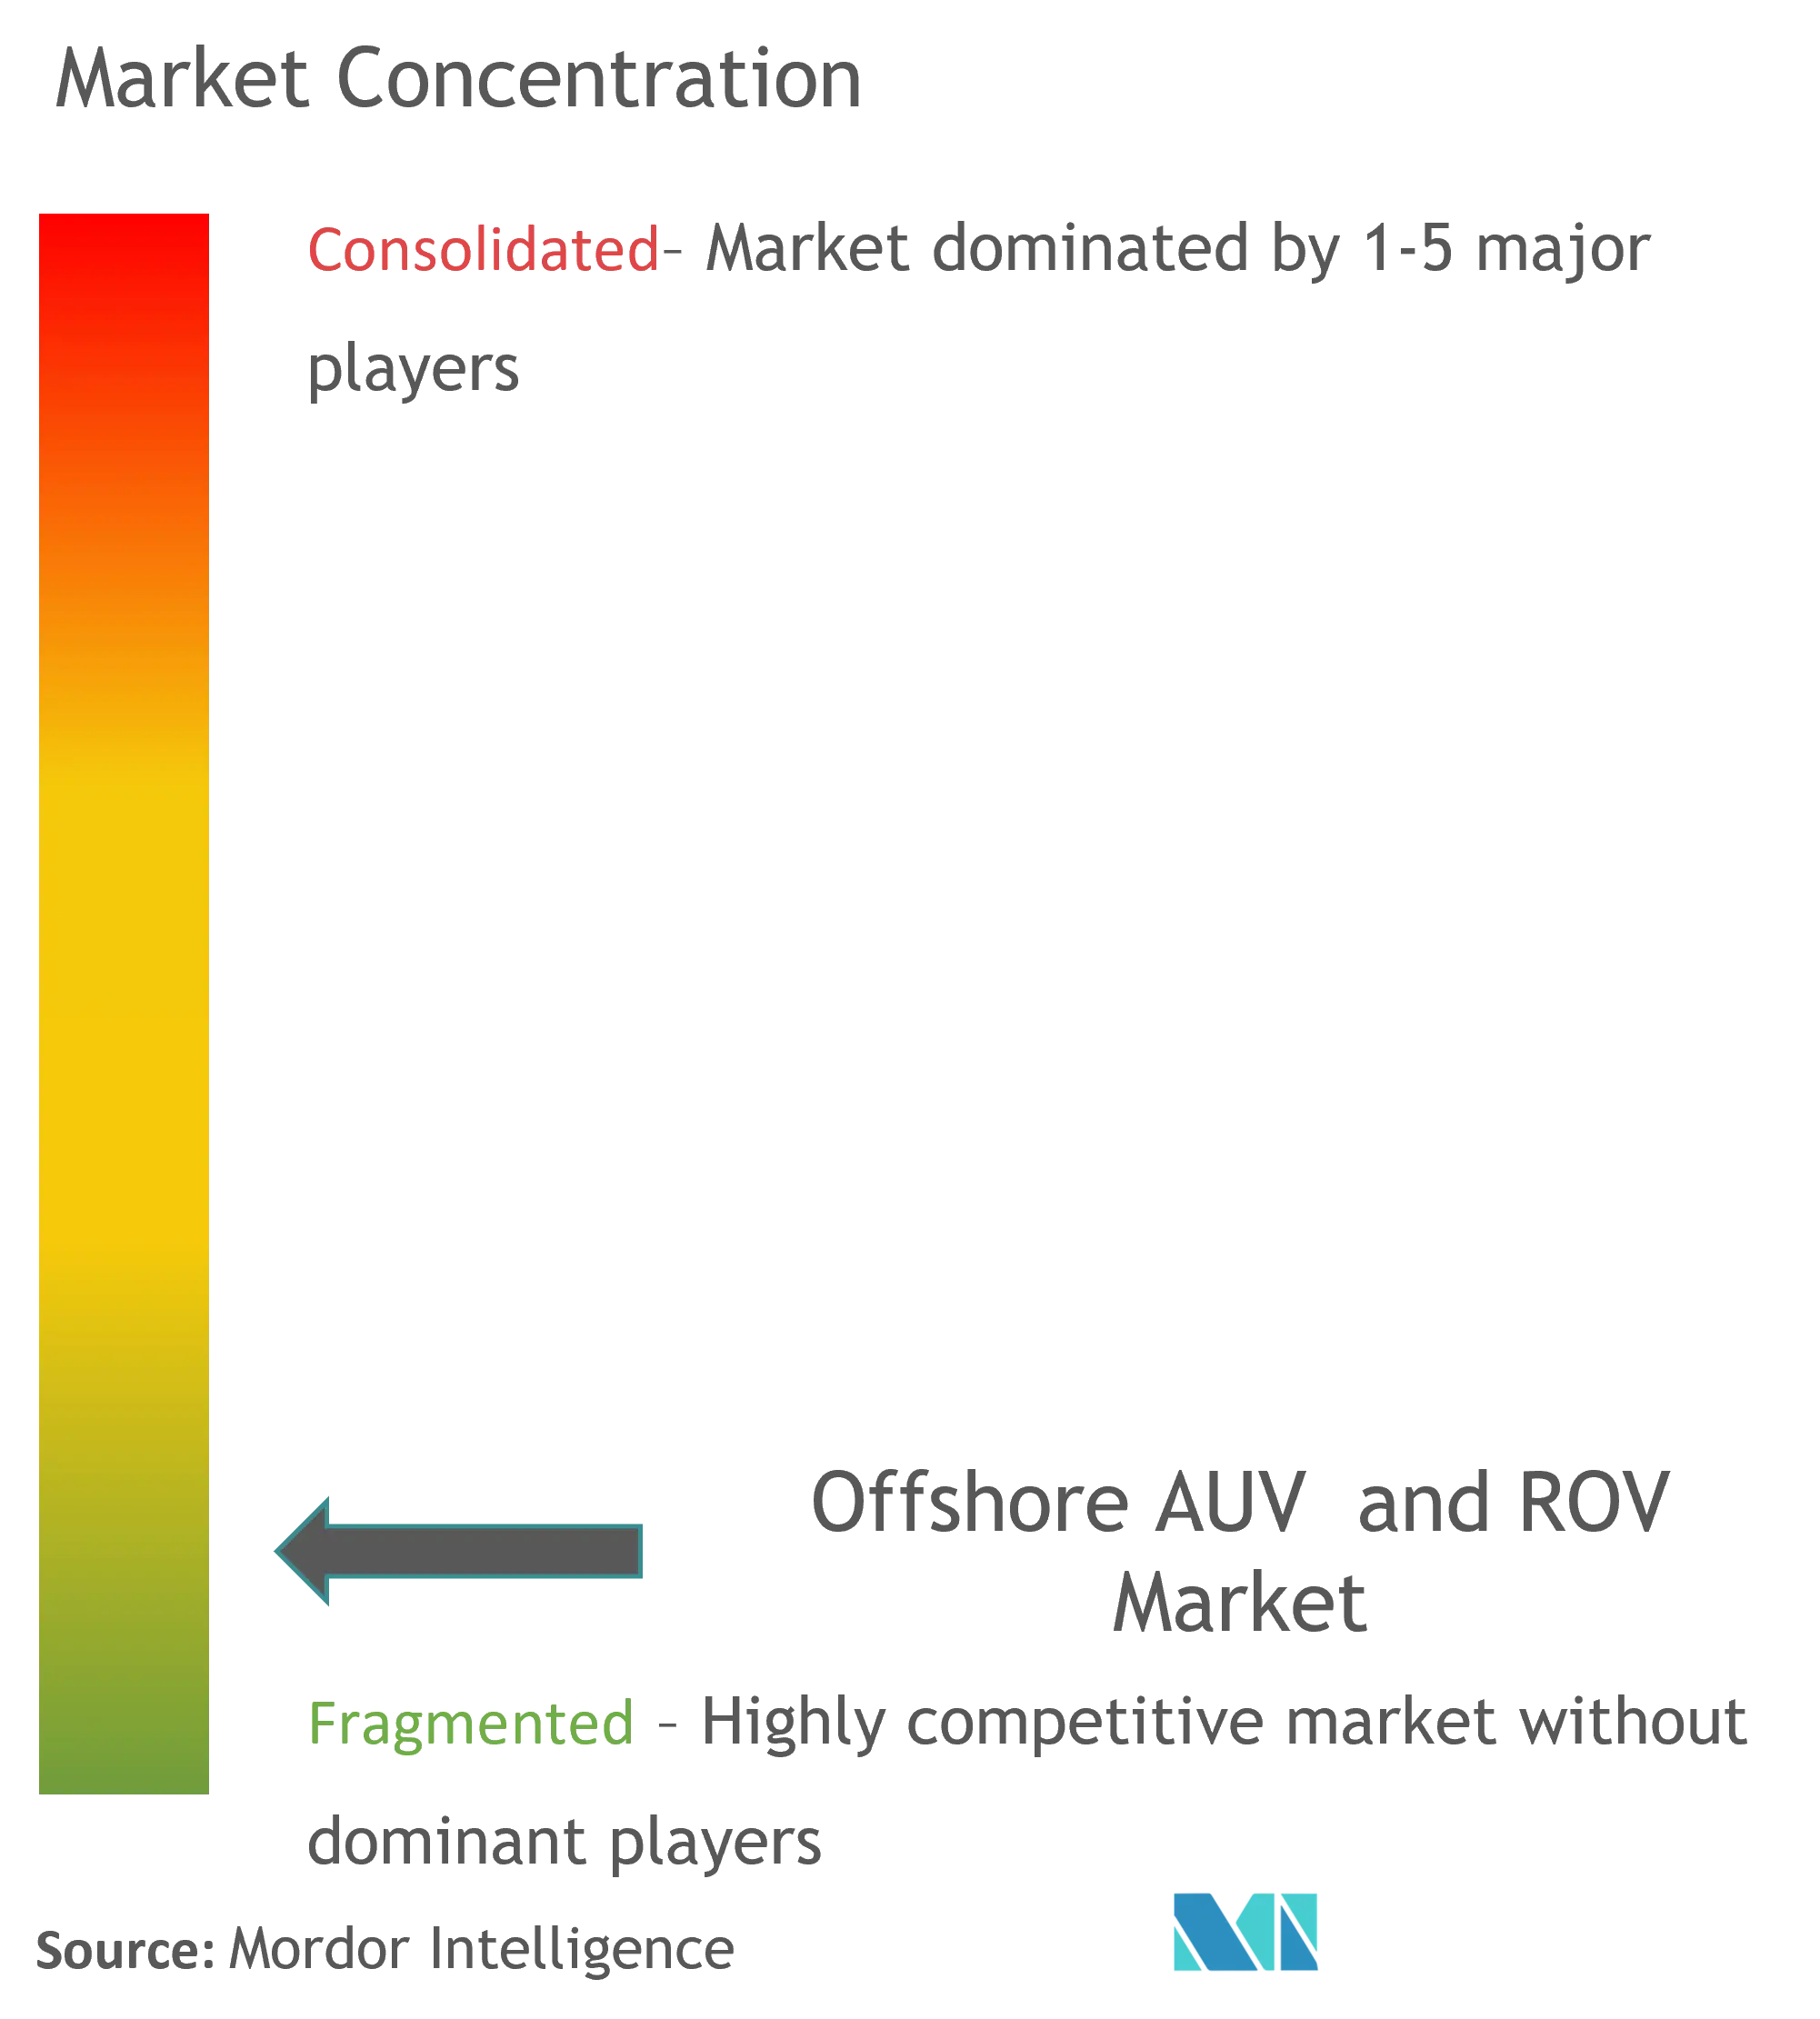 Key Players - Offshore AUV and ROV Market.jpg.png